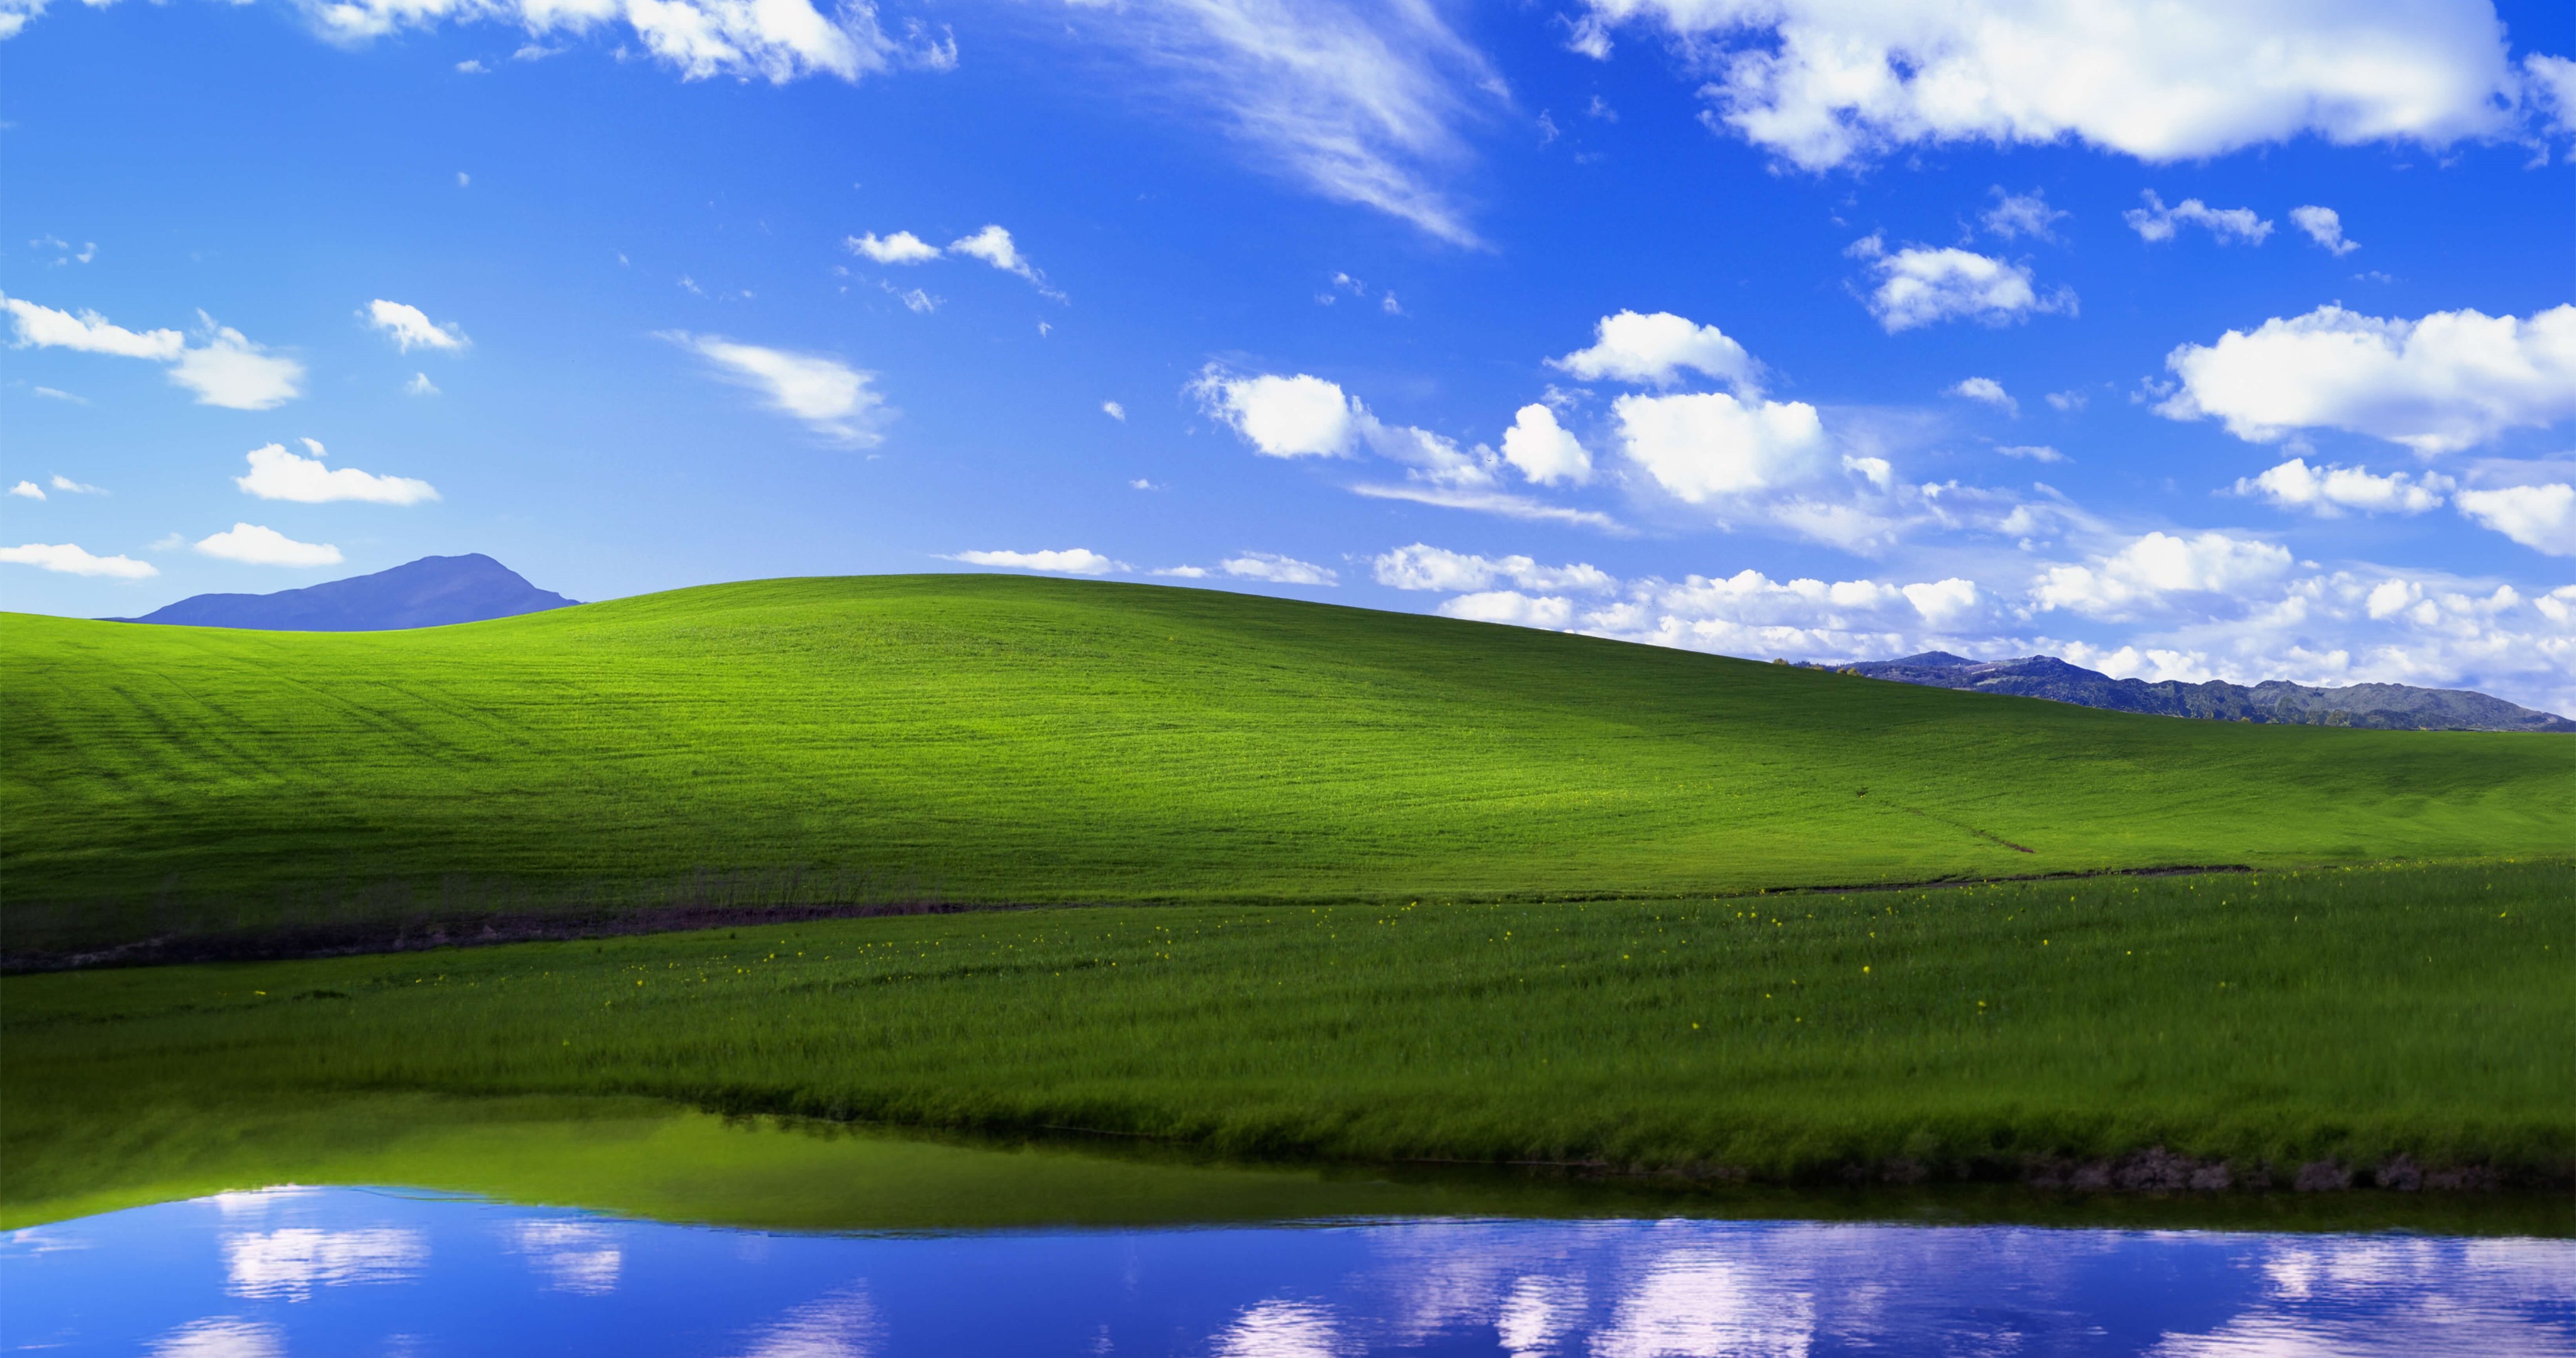 Windows on Twitter The story behind the bliss wallpaper well never  forget httptcoYJi7mgE2PJ httptcocDvYRSwZJp  X